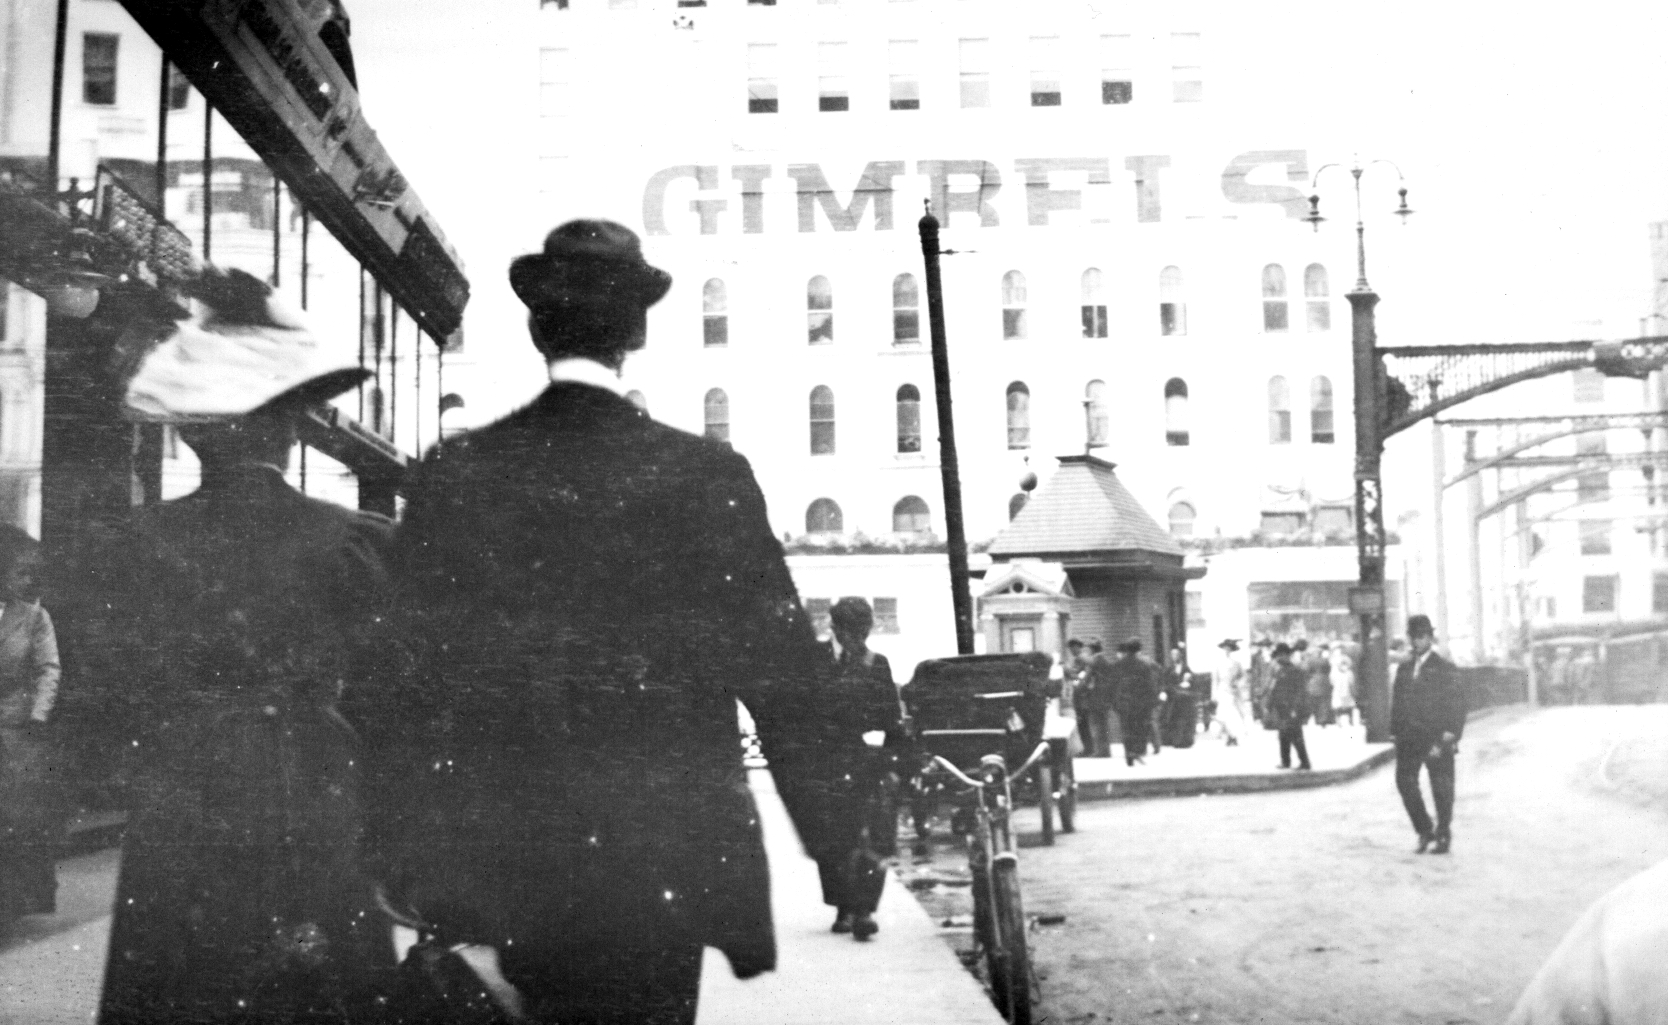 Two people walk west on Wisconsin Avenue in the early twentieth century towards the Gimbel’s Department Store.  Their dress suggests their gender identity as a woman [left] and a man [right].